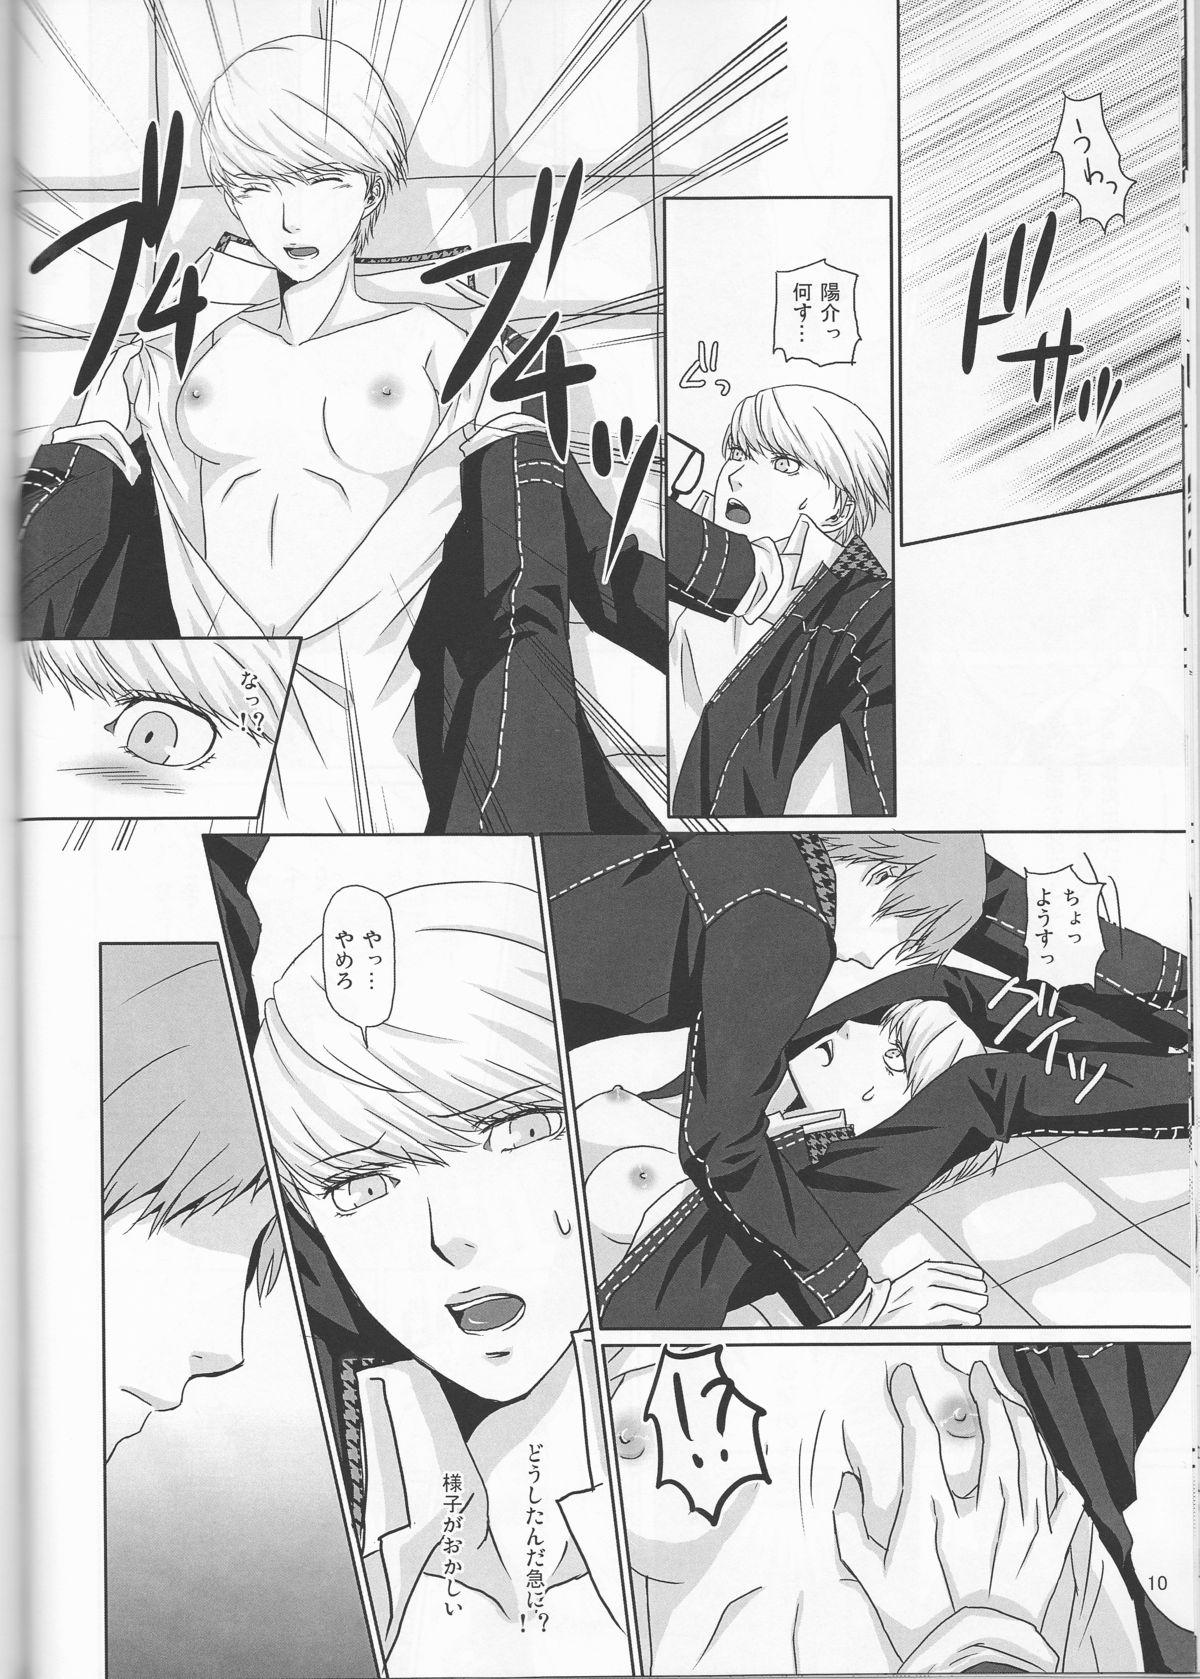 Parody what happened?! - Persona 4 Bro - Page 11